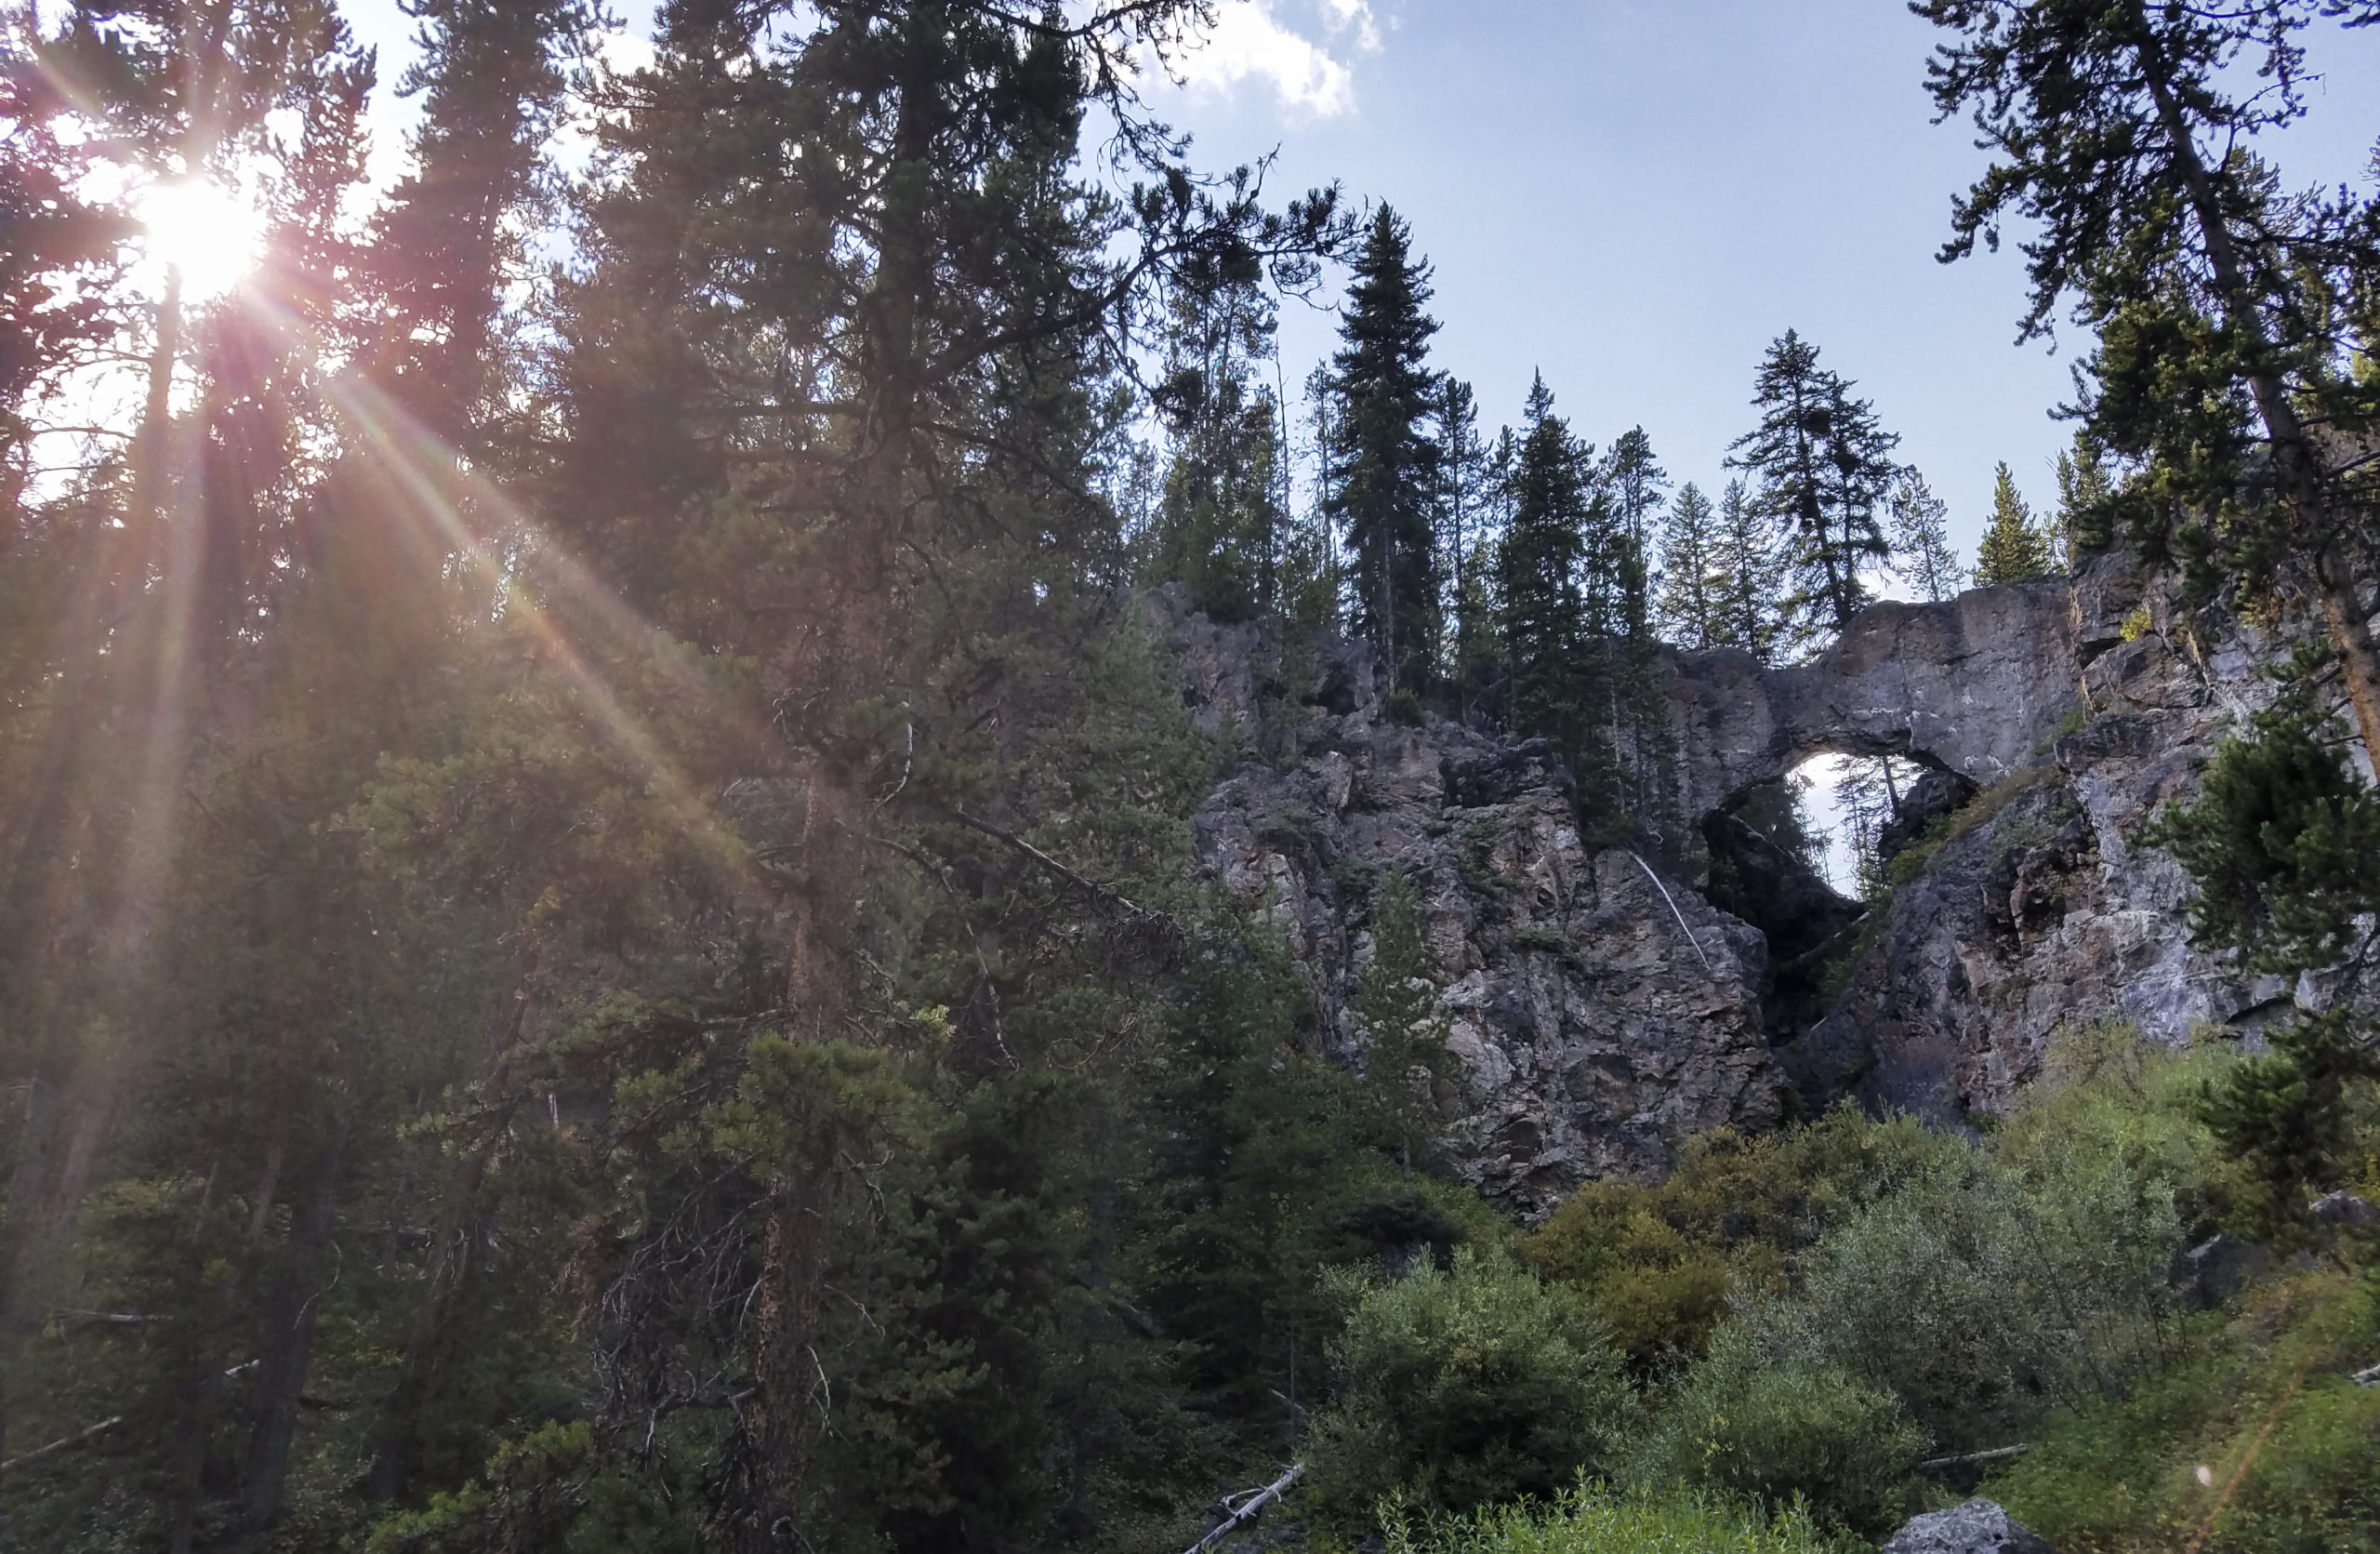 Natural Bridge at Sunset. Tip: This is an easy hike to plan if camping at Bridge Bay campground.